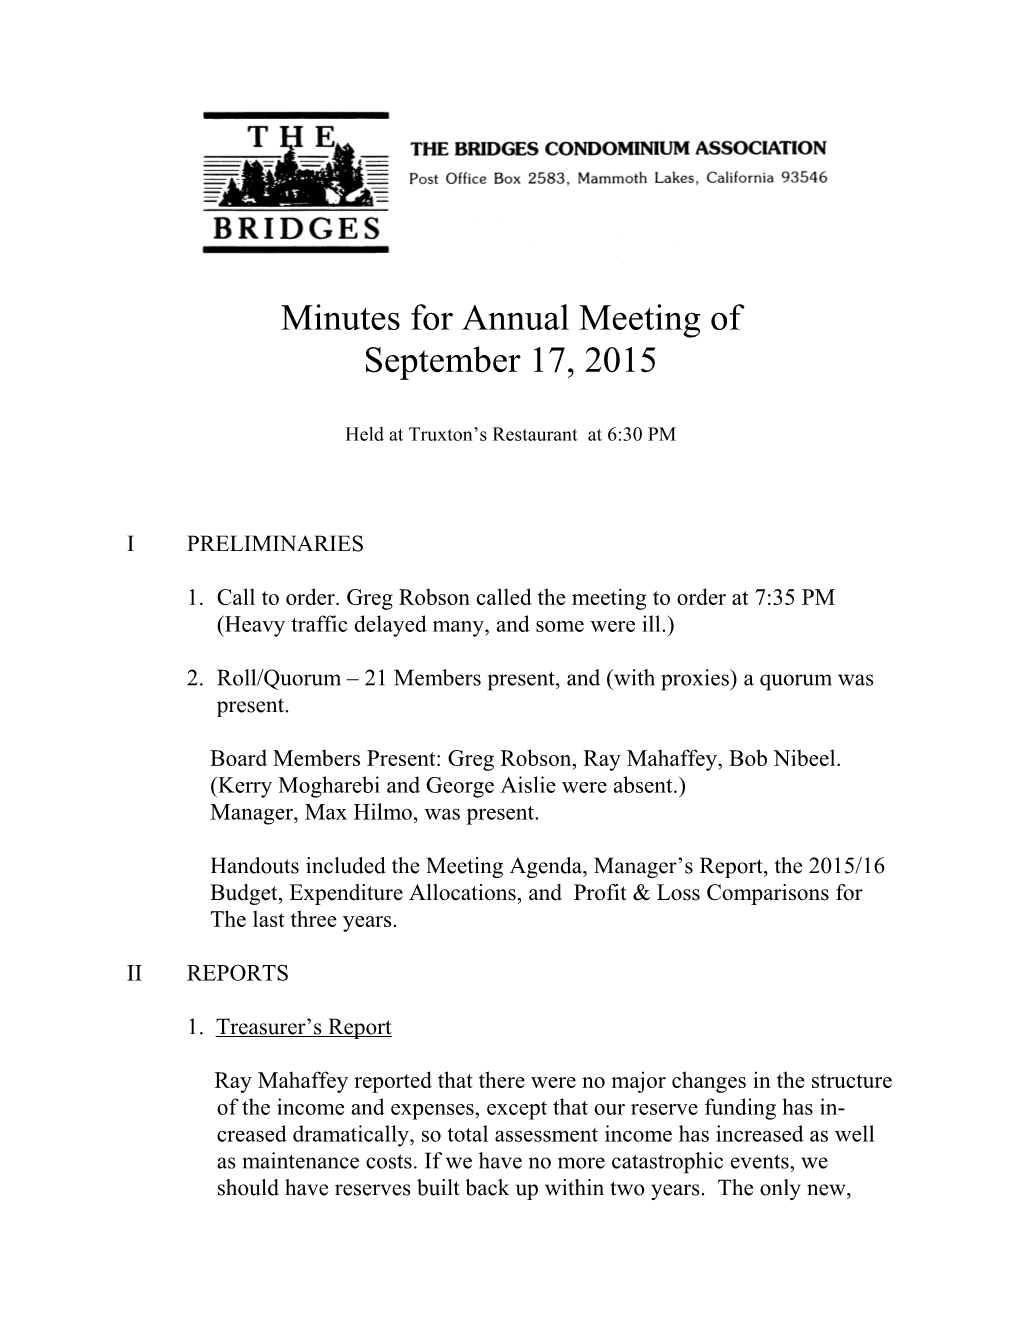 Minutes for Annual Meeting Of